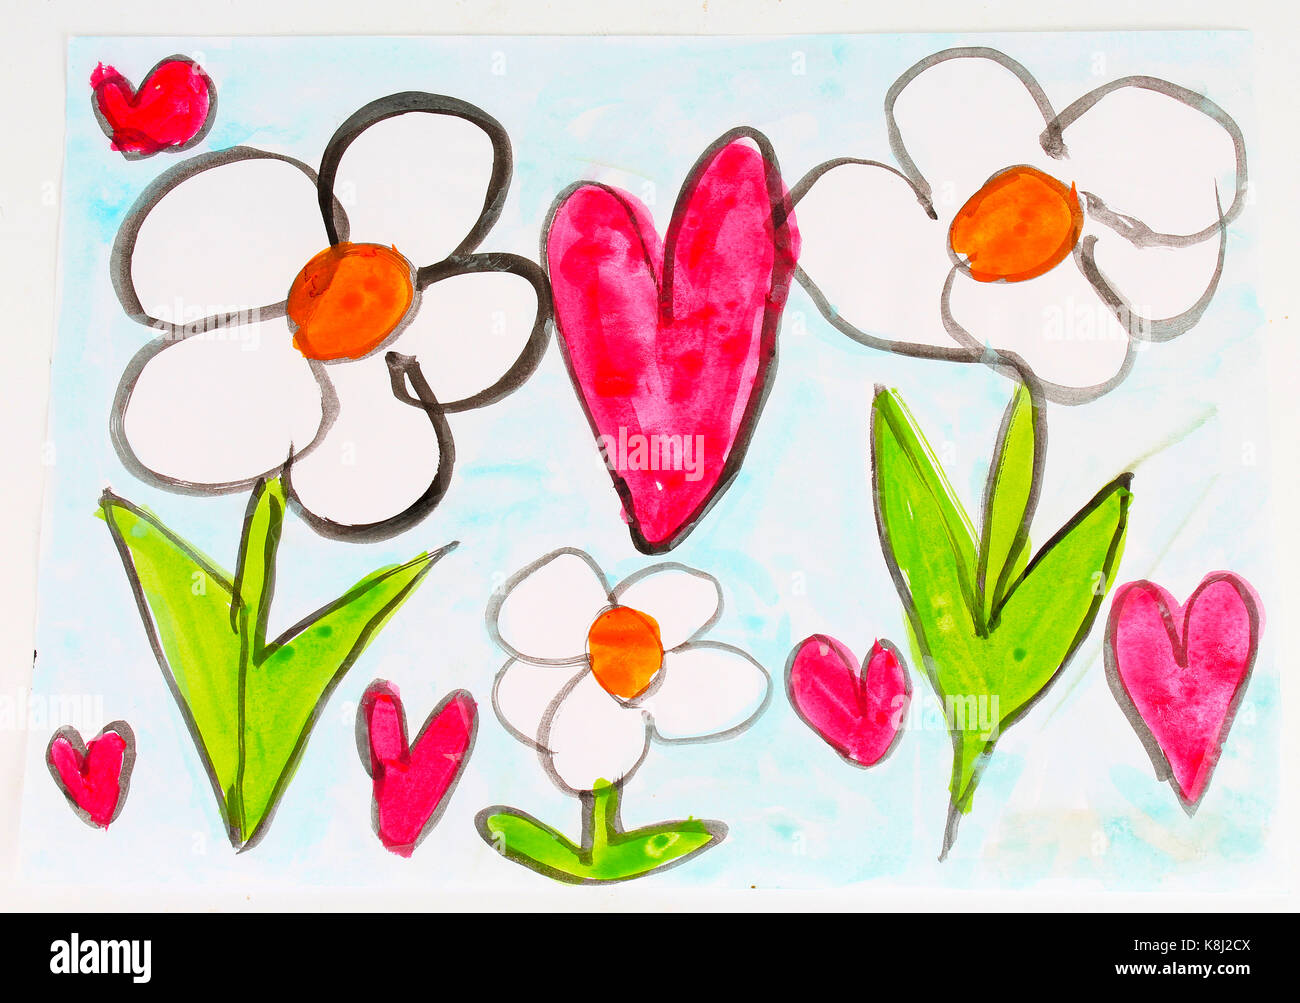 Child Draw For Mother S Day Children Drawings Kid S Draws Stock Photo Alamy,Diy Gifts For Friends During Quarantine